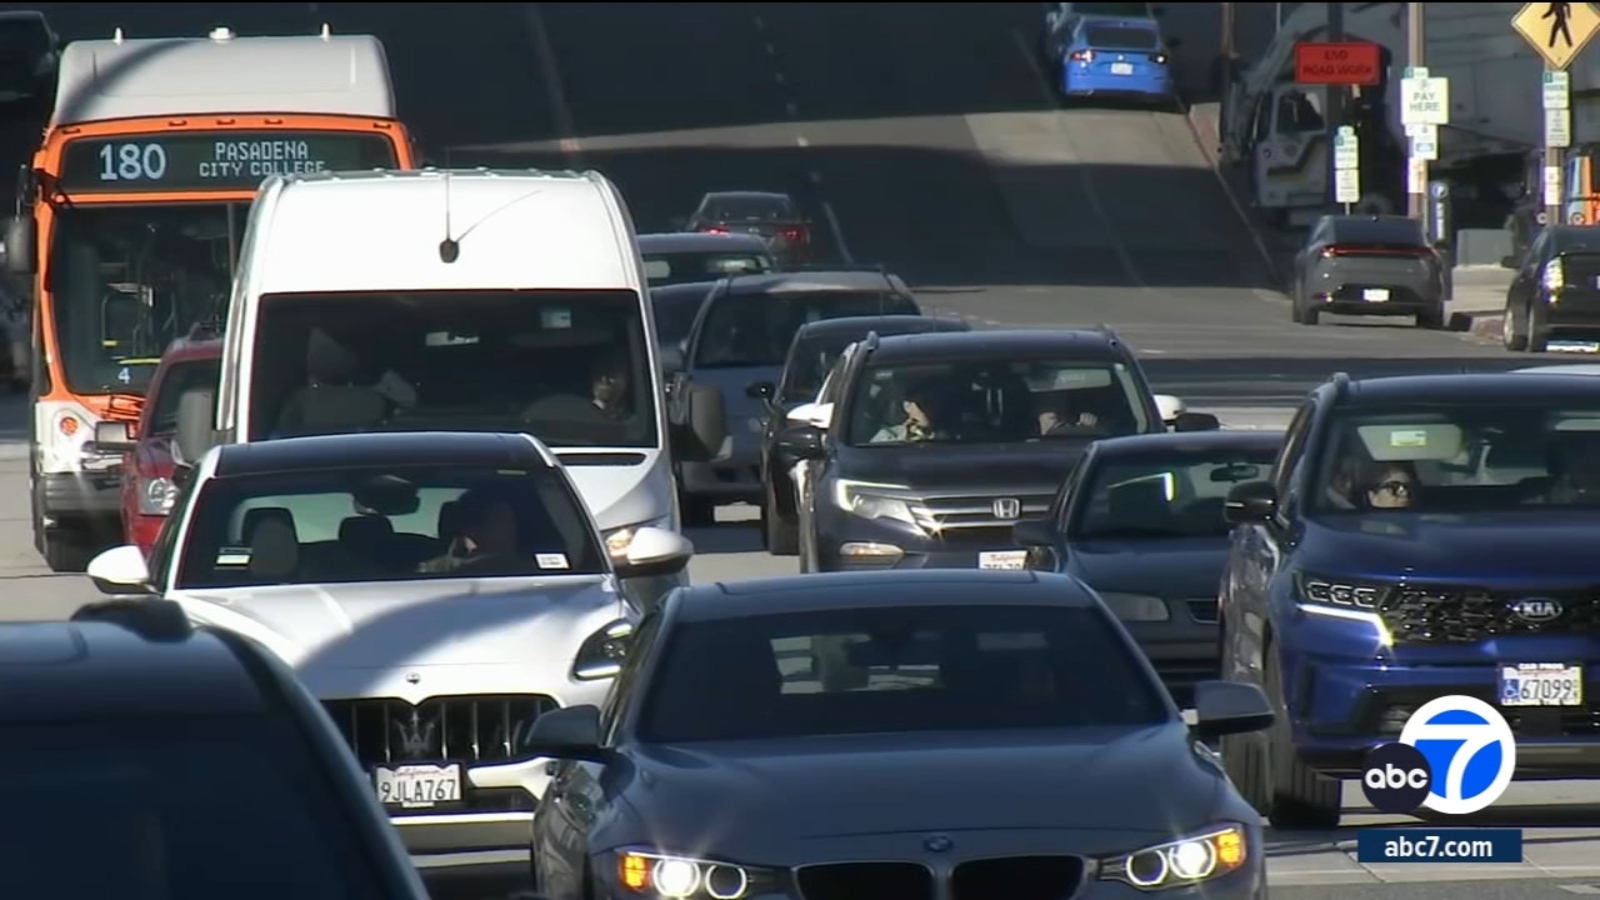 Beep! New cars in California could alert drivers for breaking the speed limit [Video]